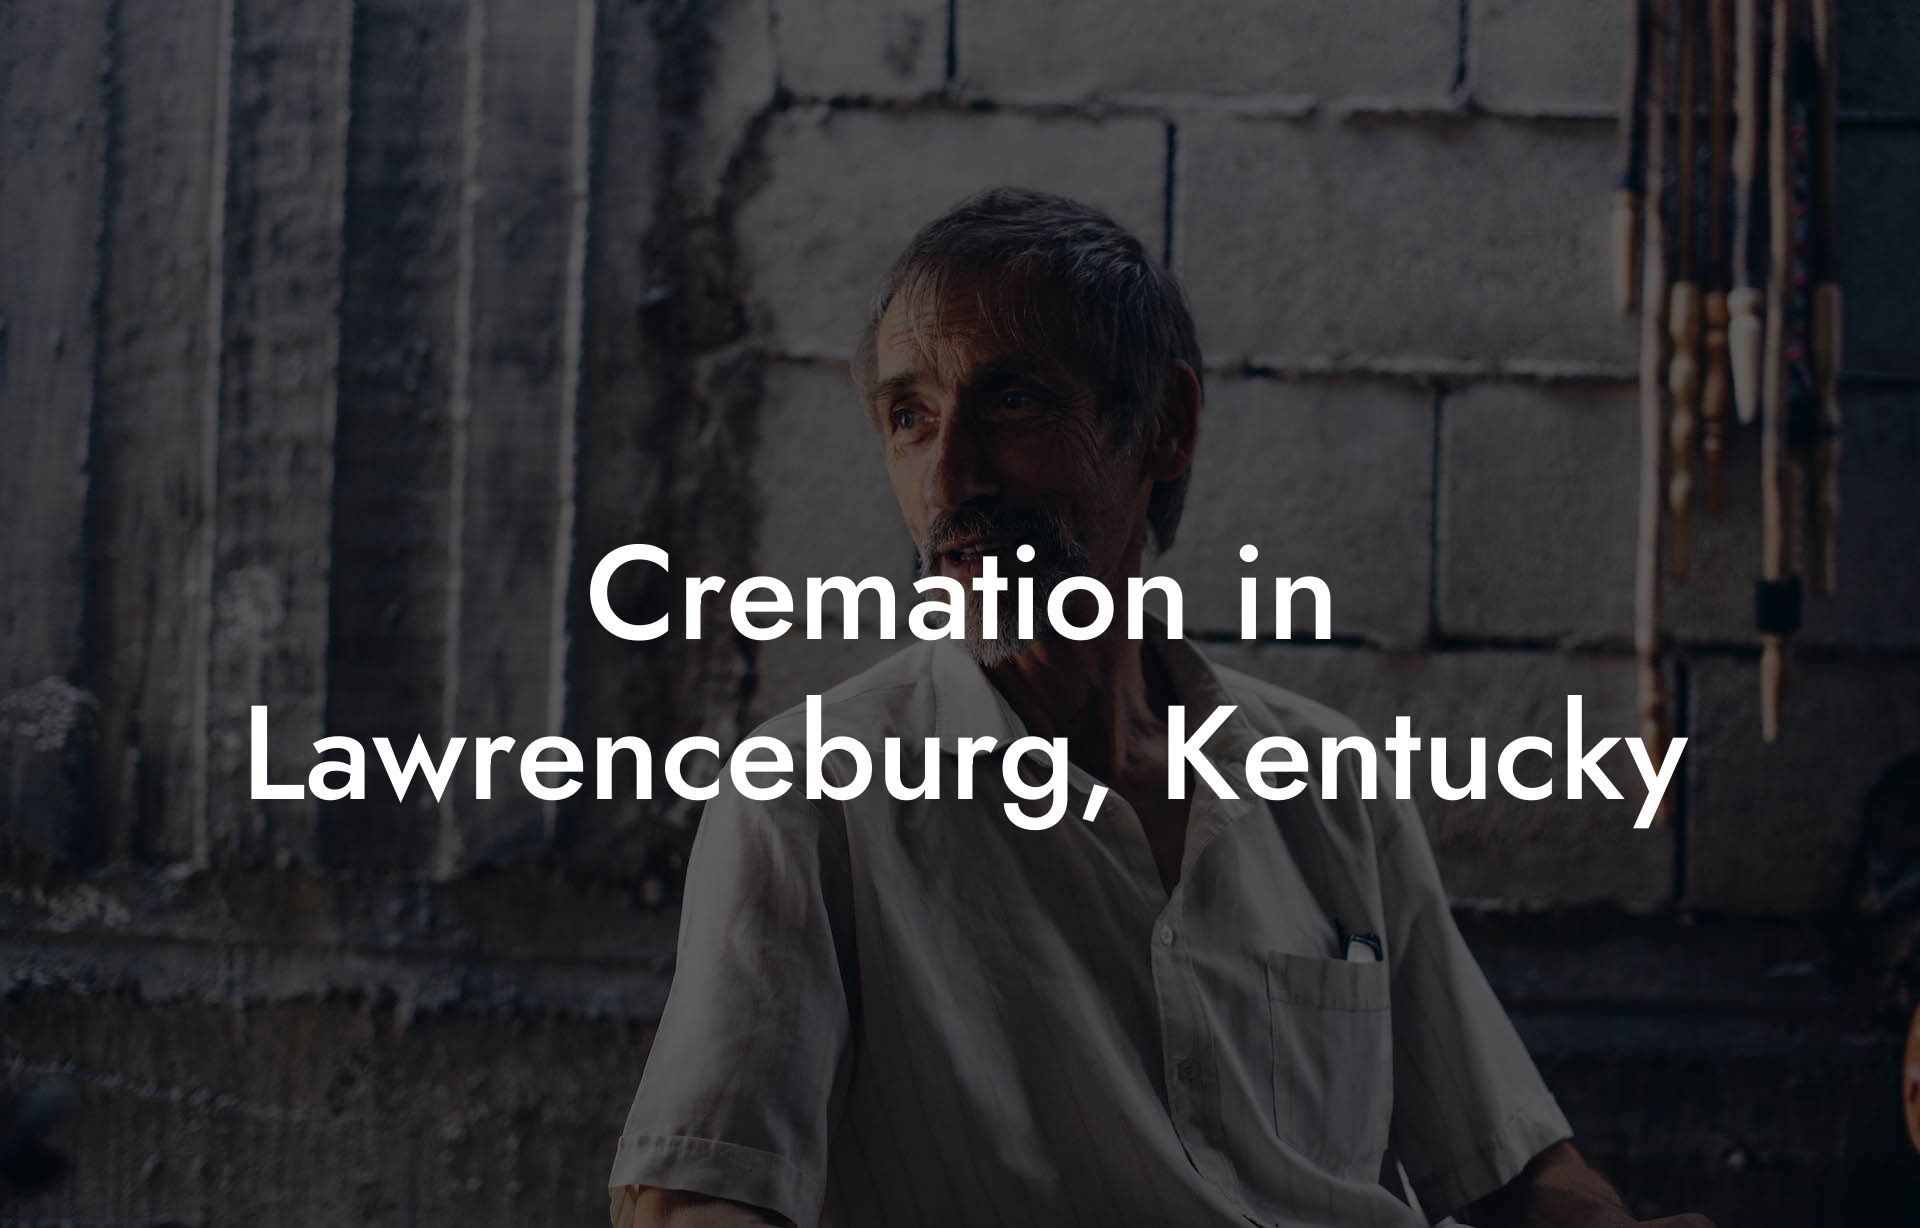 Cremation in Lawrenceburg, Kentucky